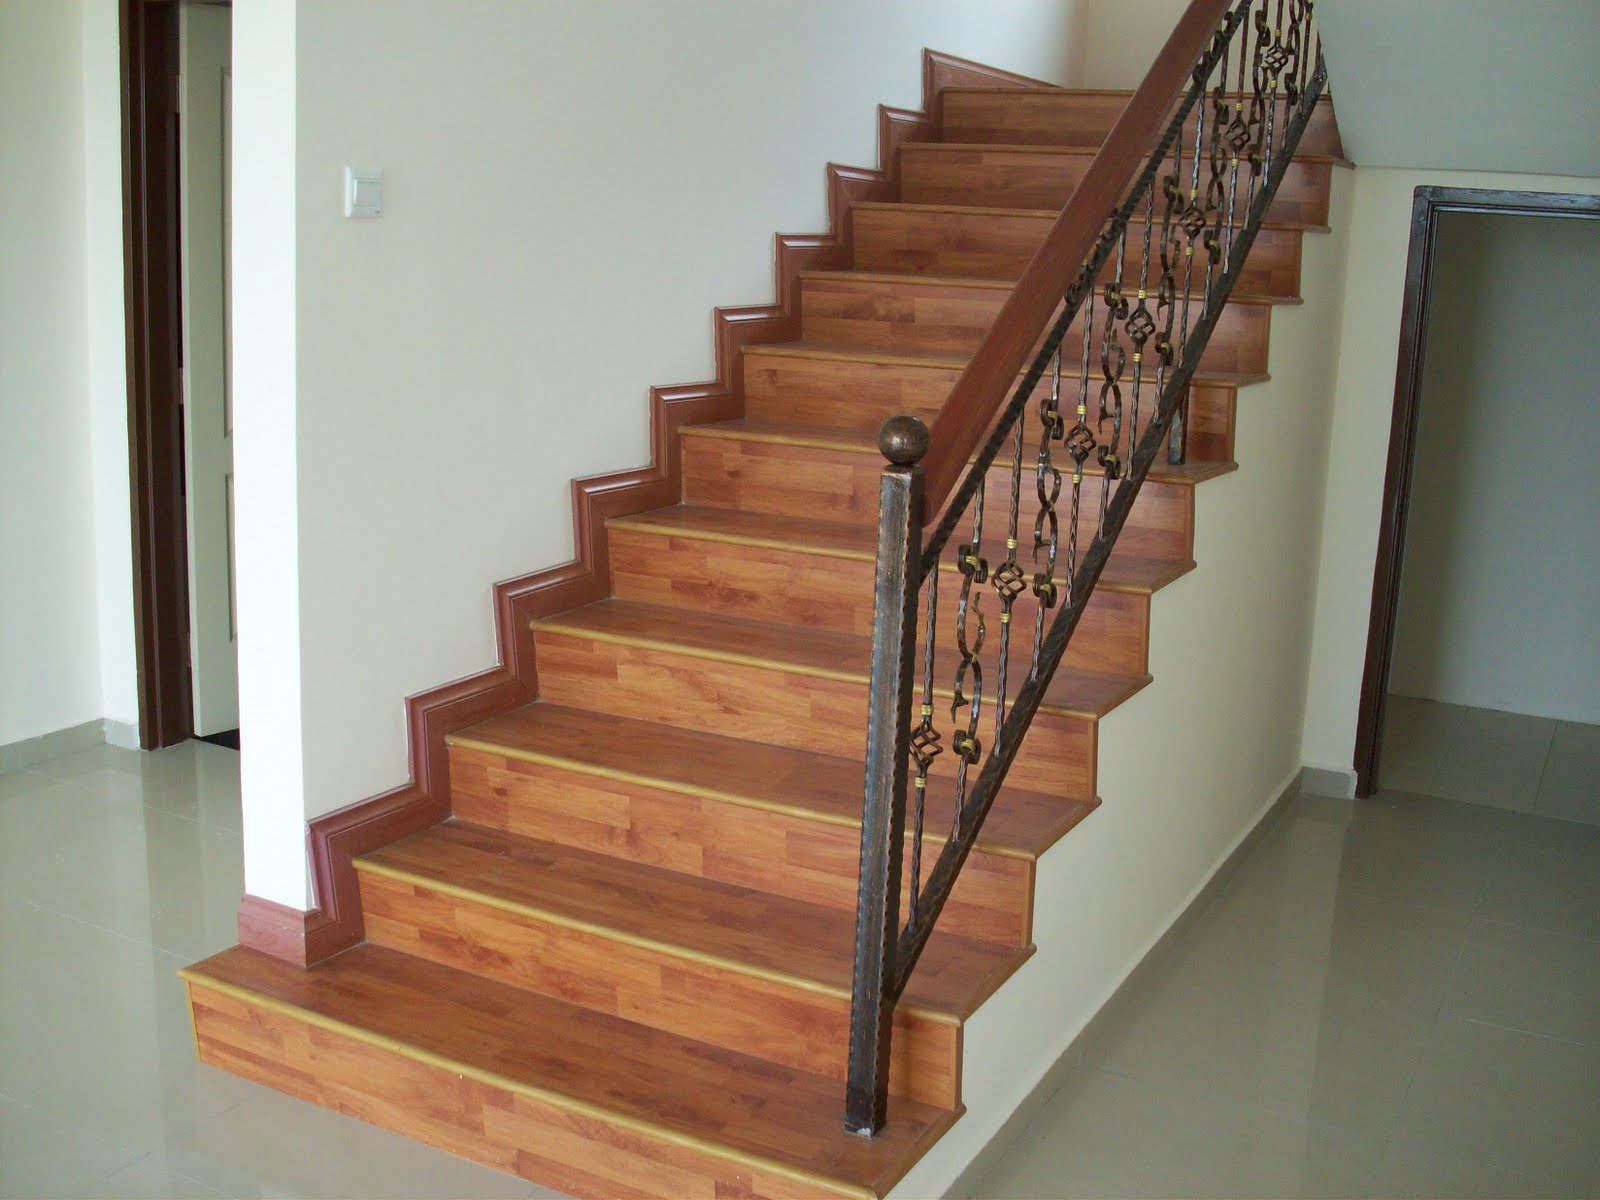 How To Install Wood Flooring On Stairs, How To Install Wooden Flooring On Stairs